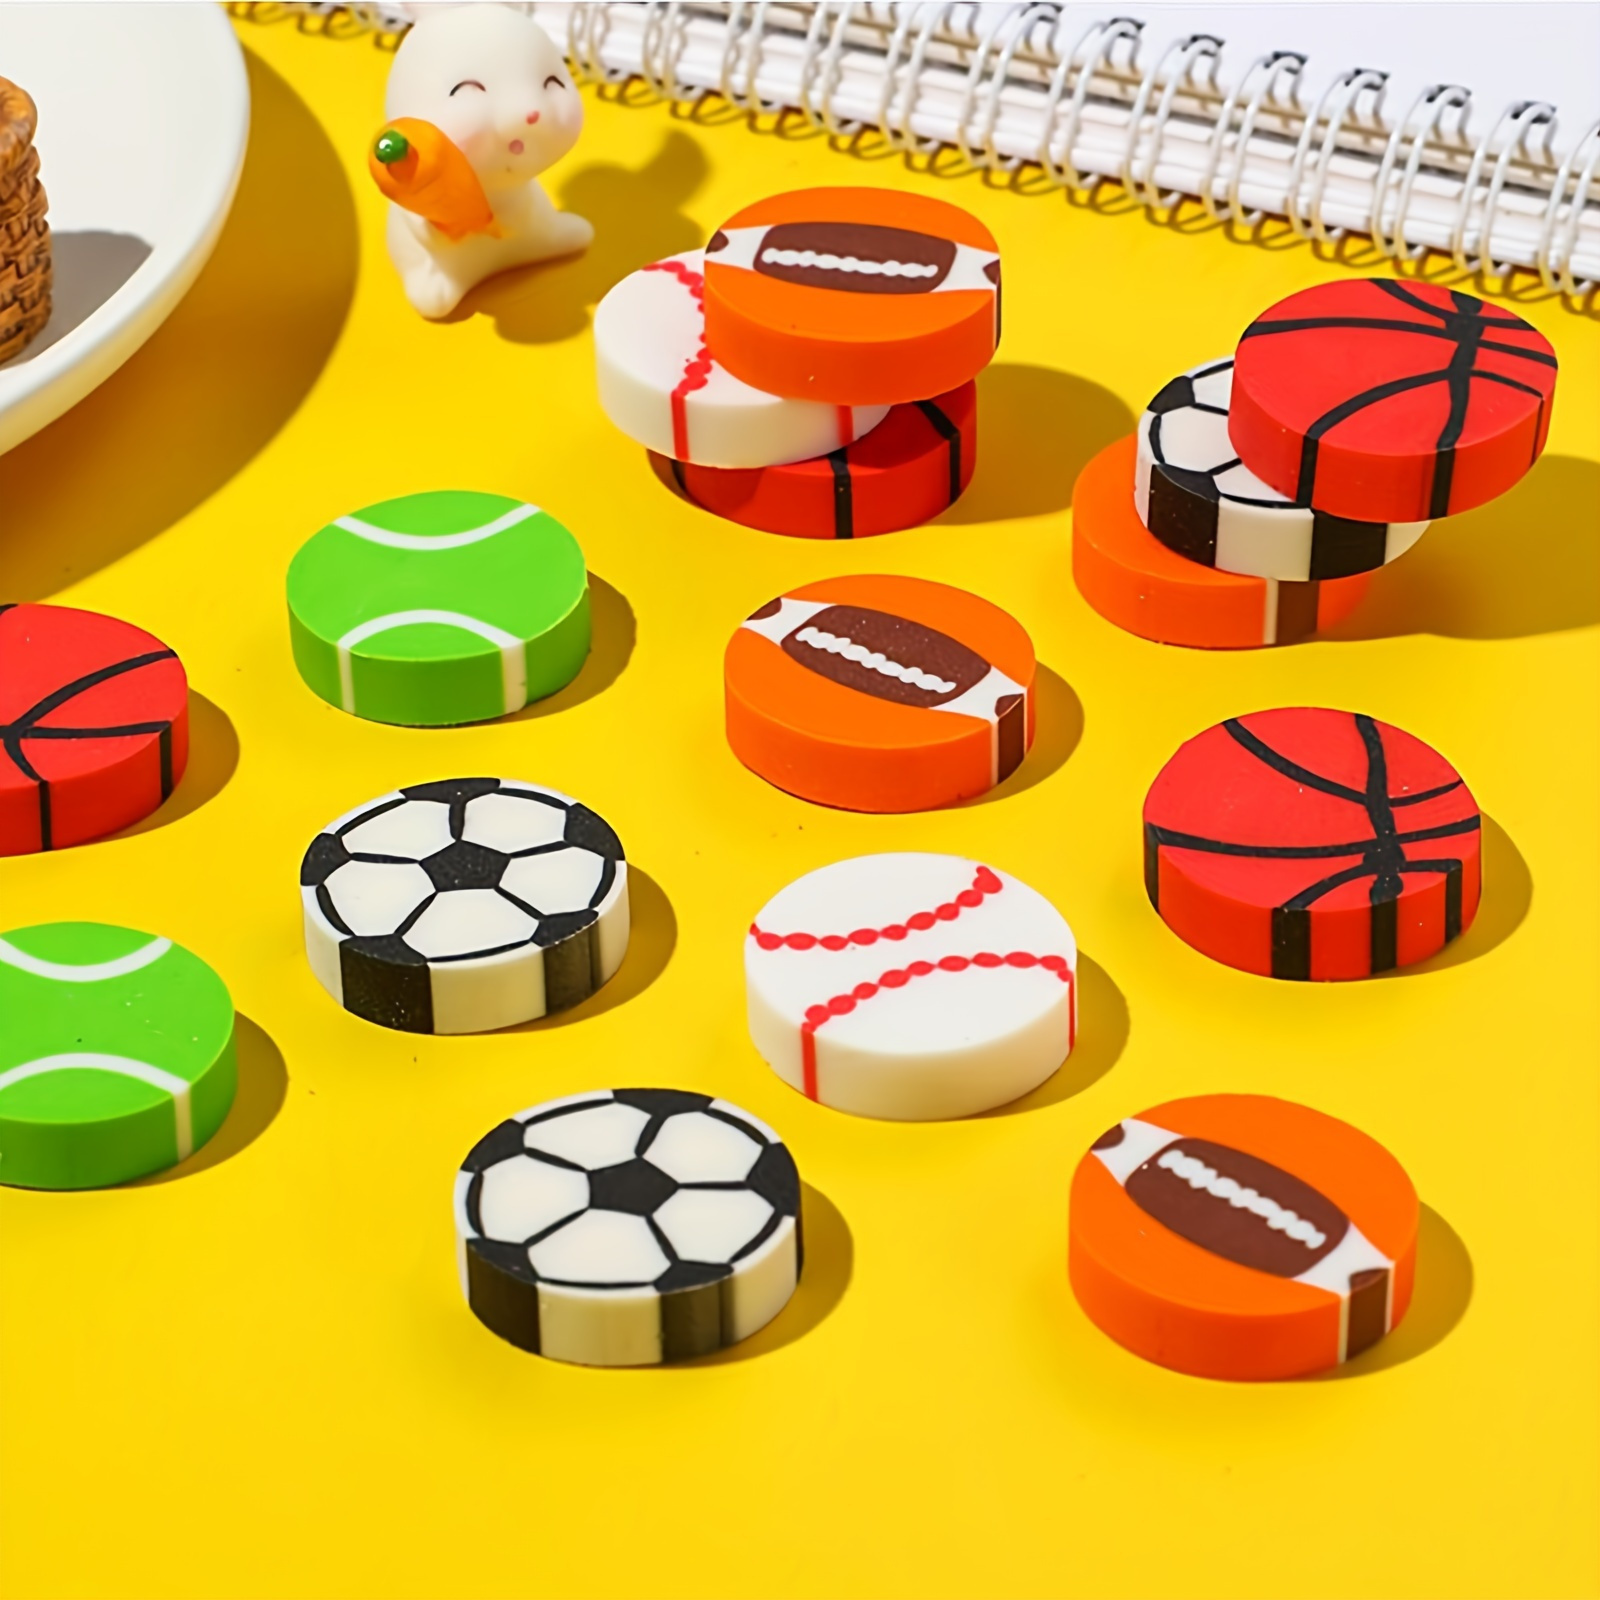 

30pcs Sports Ball Pattern Mini Erasers Assortment Novelty Pencil Erasers Bulk For Party Favor Home School Work Classroom Rewards Prizes Christmas Thanksgiving Gift